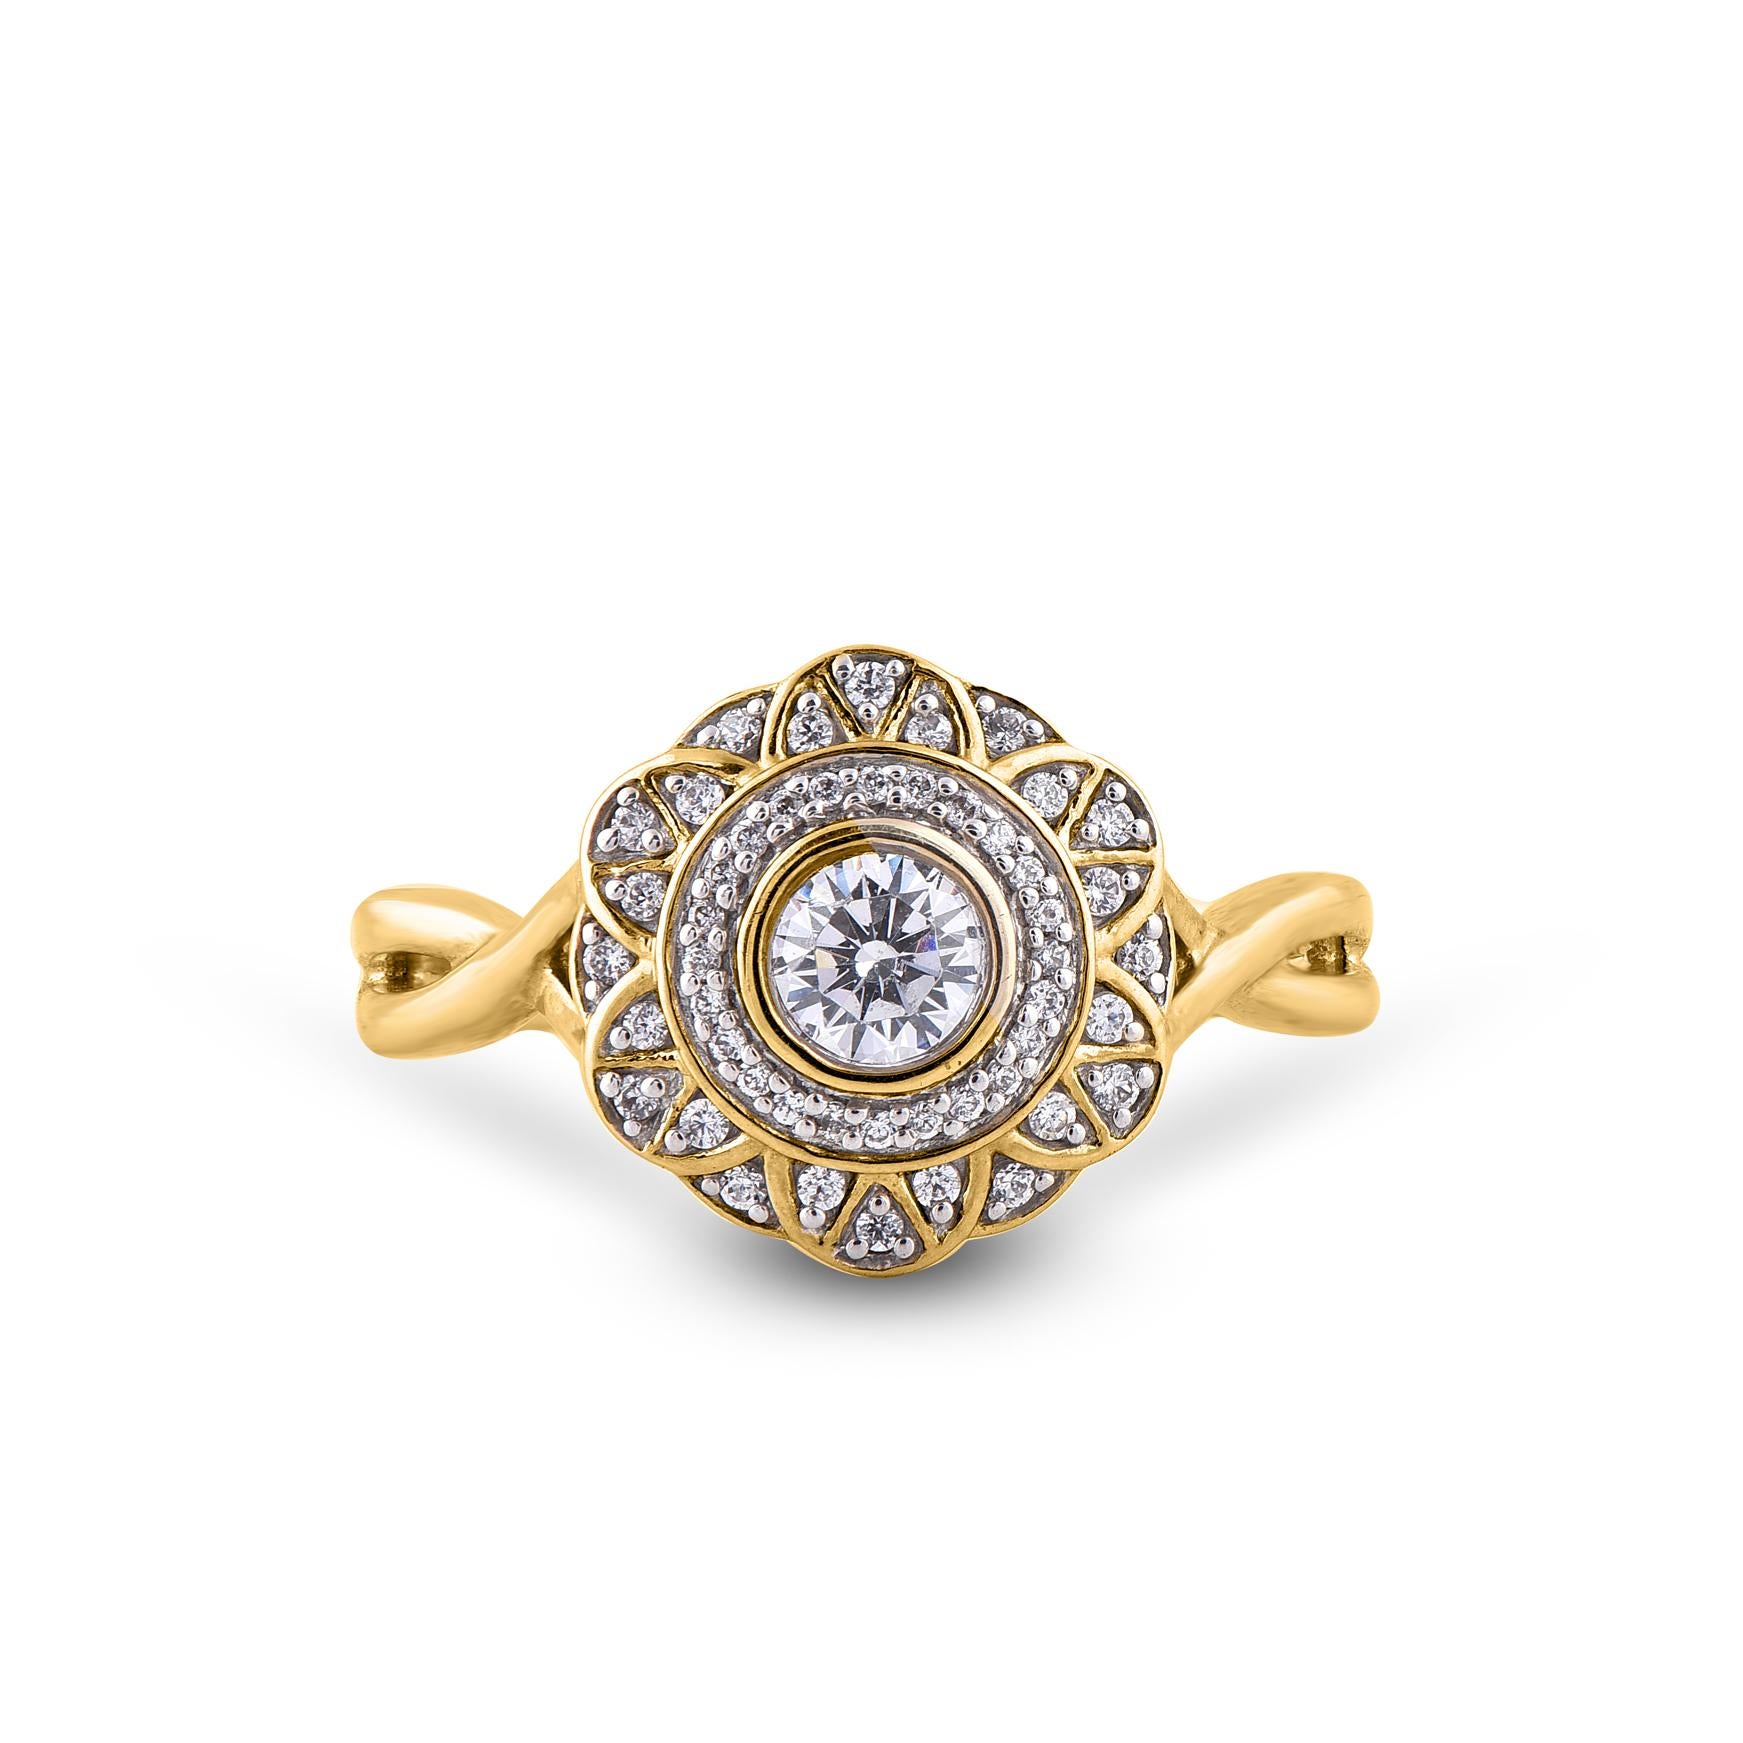 Truly exquisite, this diamond anniversary ring is sure to be admired for the inherent classic beauty and elegance within its design. These ring is crafted in 14KT yellow gold, and studded with 49 single cut and brilliant cut natural diamonds in pave